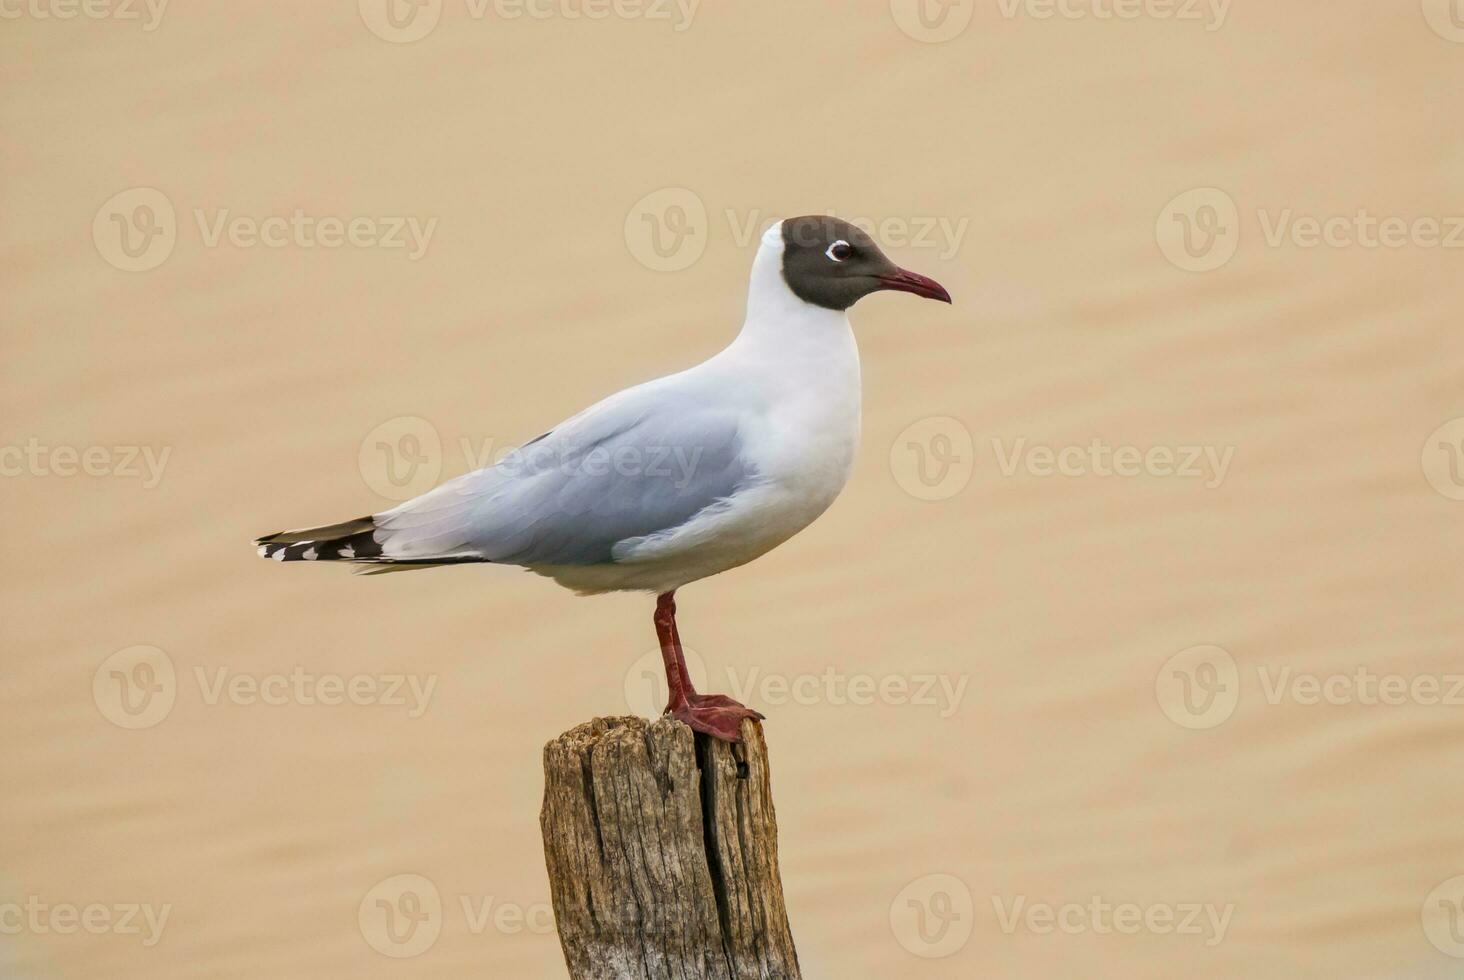 Brown hooded gull, La Pampa Province Patagonia, Argentina photo